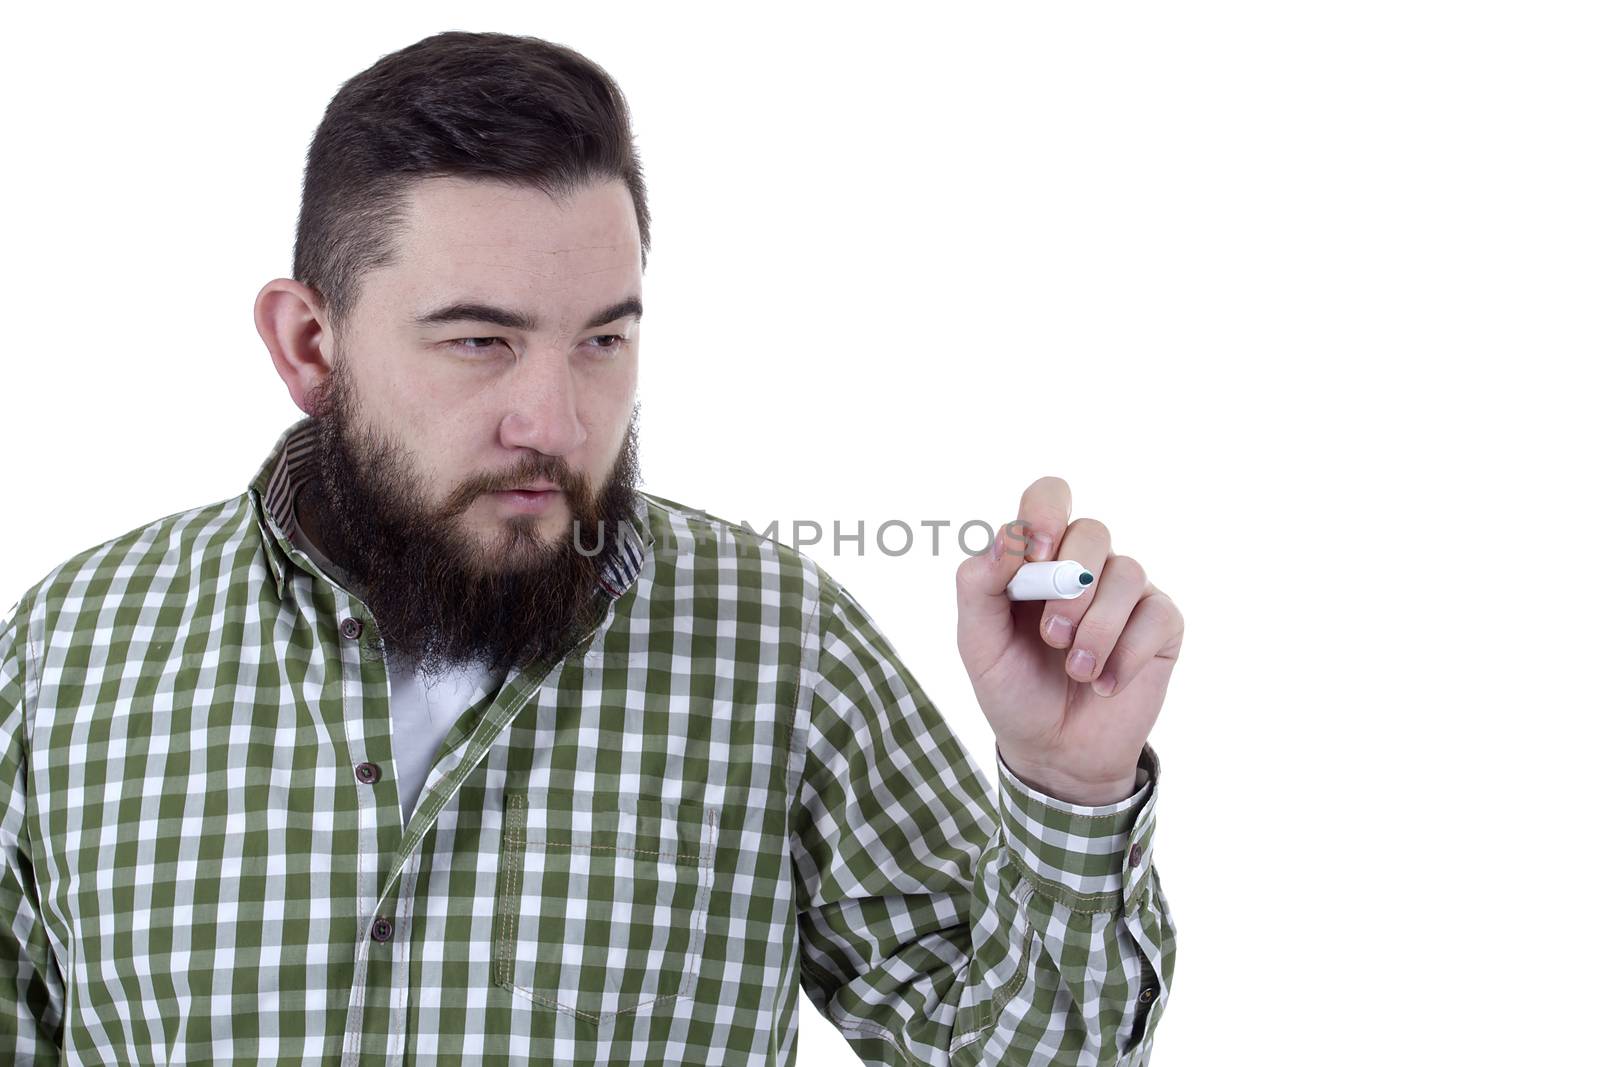 Man with a beard uses a green felt-tip pen on a white background